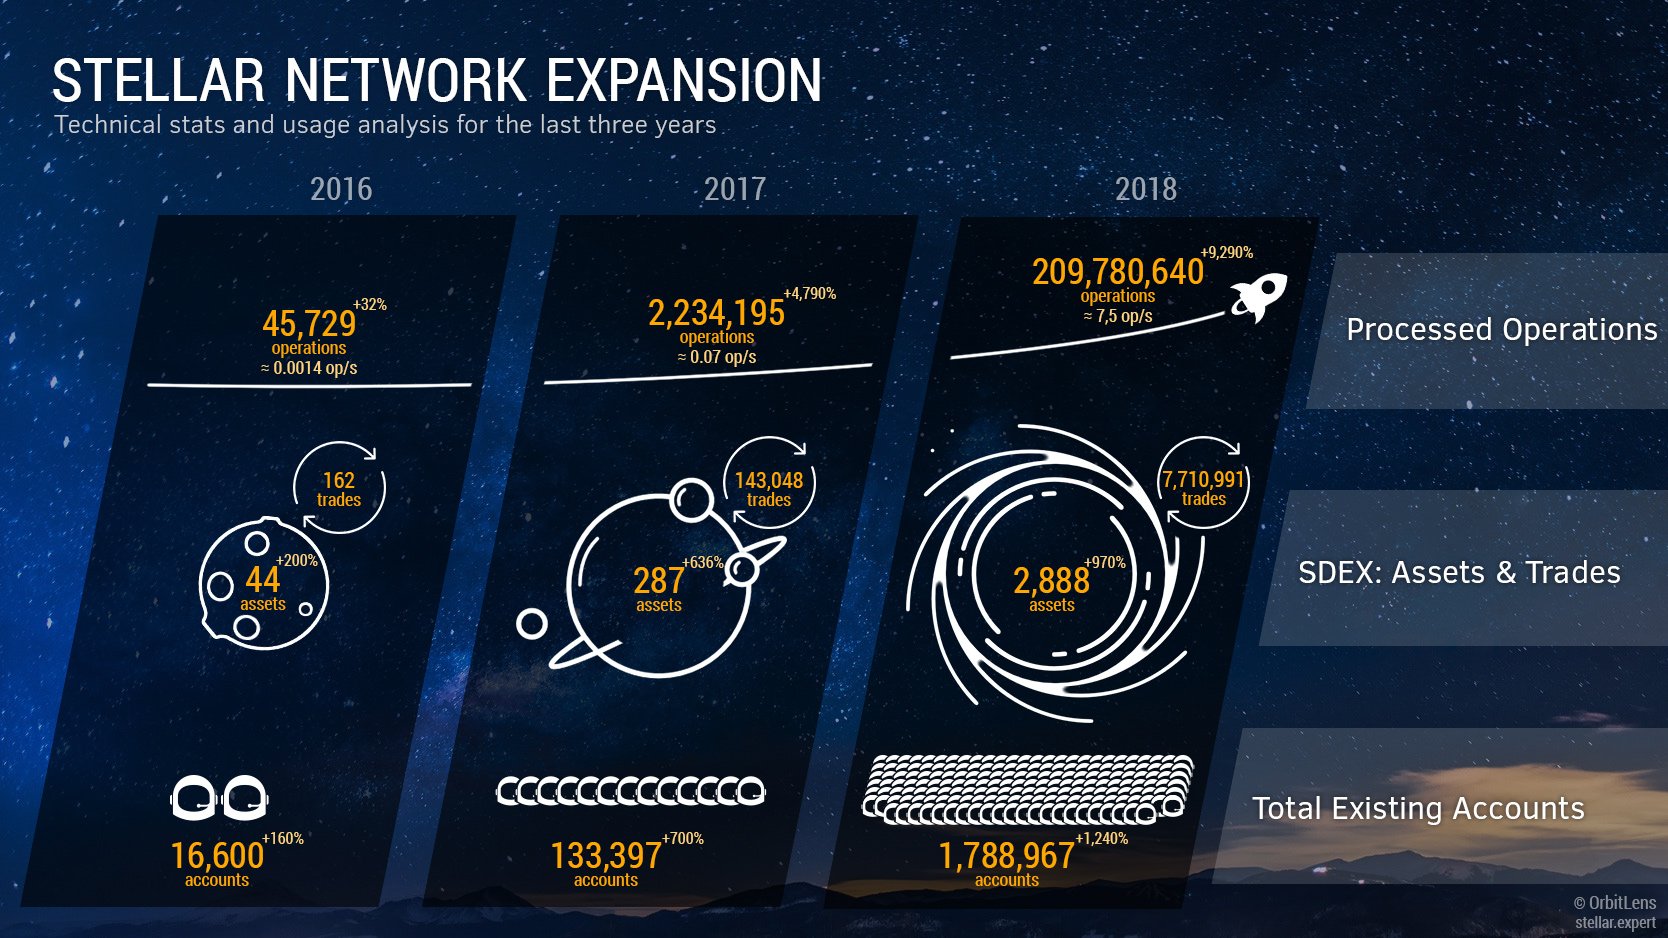 Infographic of Stellar's Network Expansion between 2016 and 2018